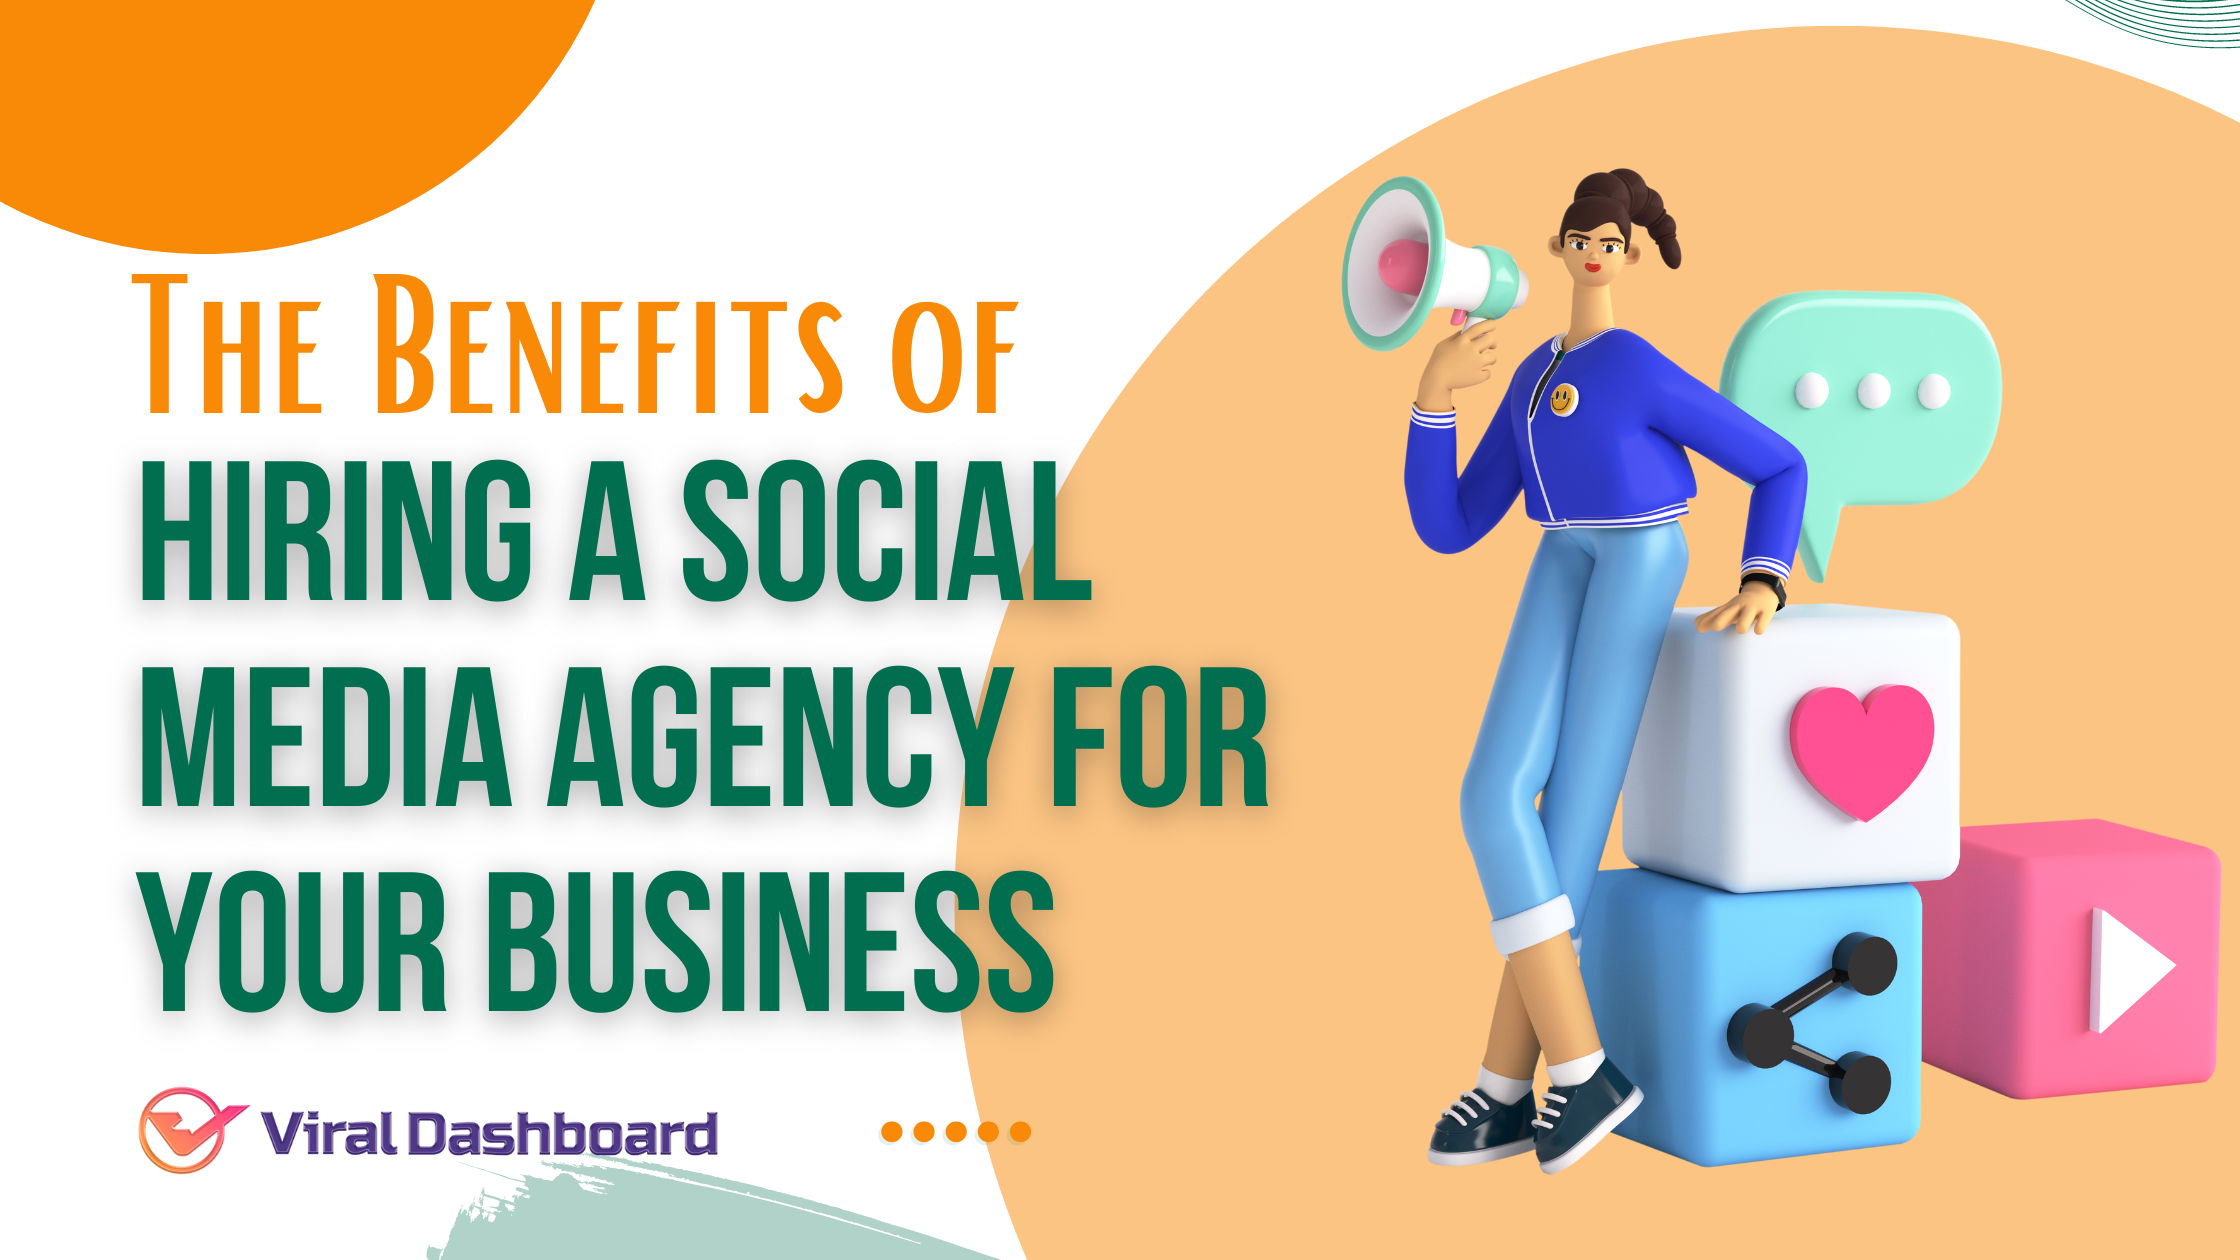 The Benefits of Hiring a Social Media Agency for Your Business